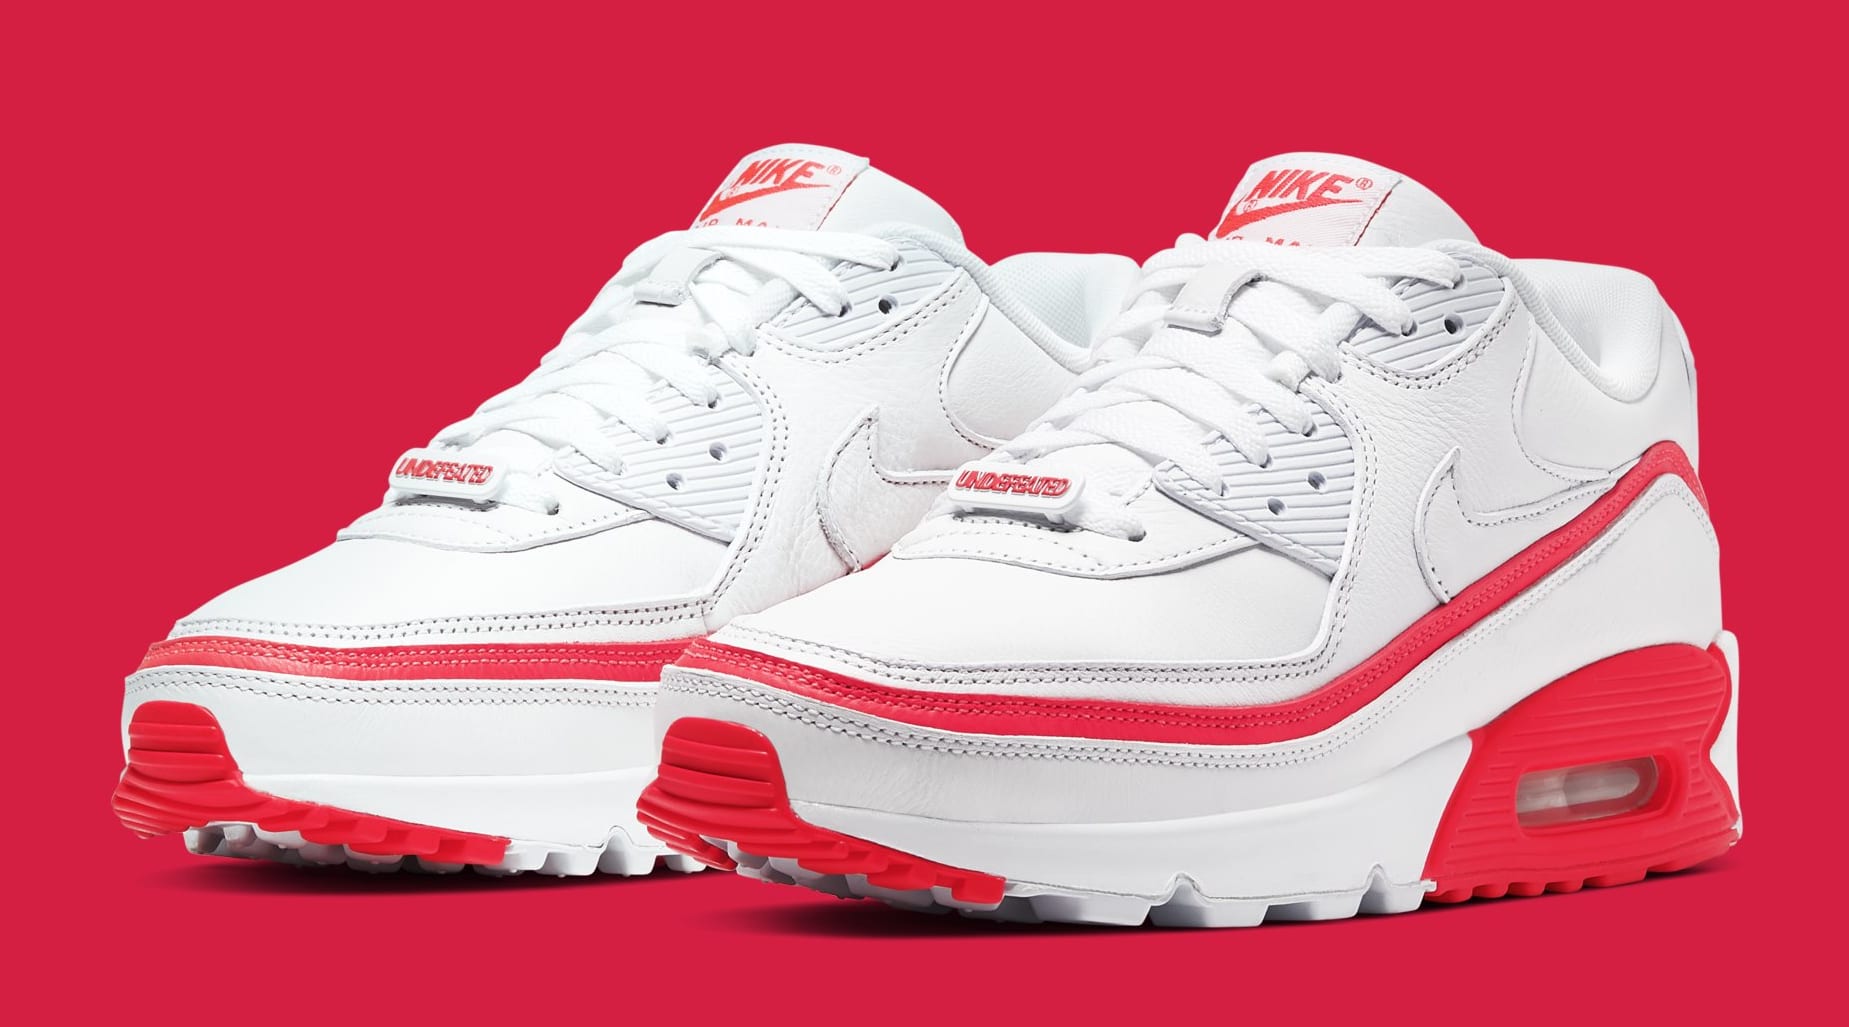 undefeated-nike-air-max-90-white-solar-red-cj7197-103-pair